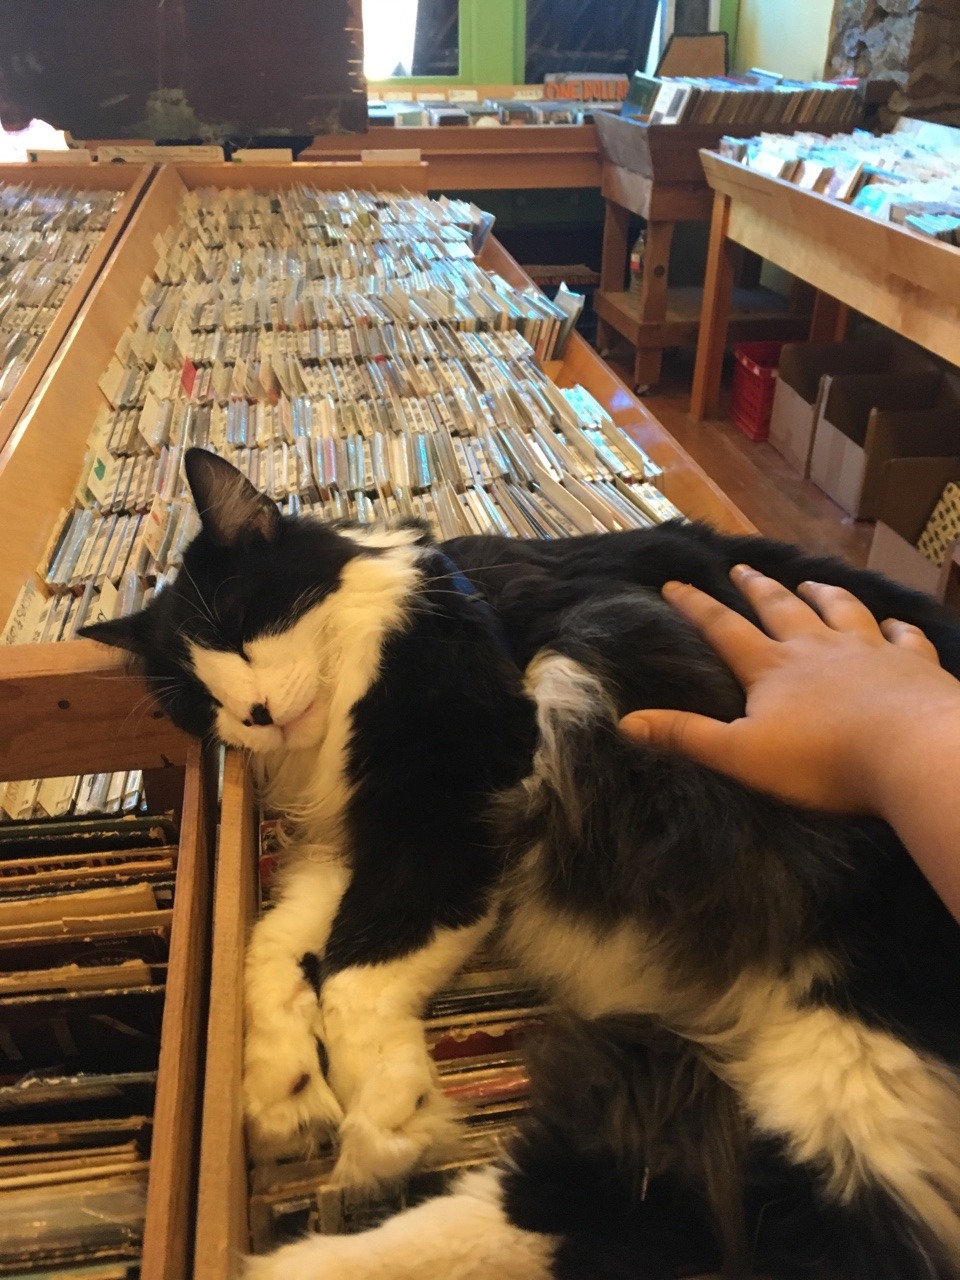 unflatteringcatselfies:I was at a record store and they had the largest car I have